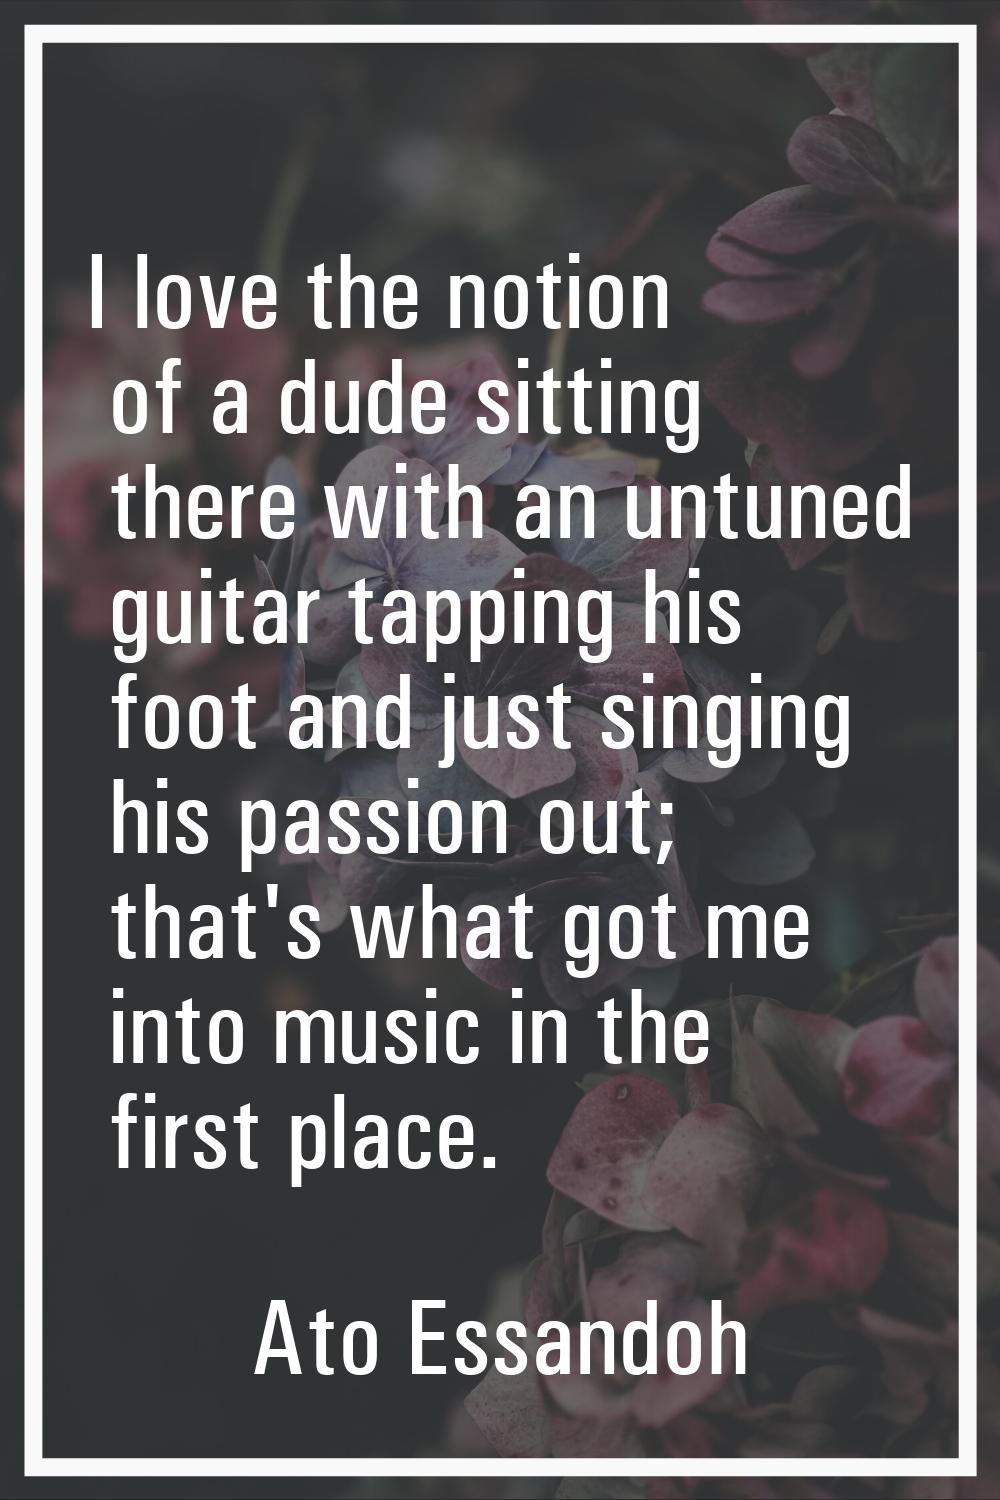 I love the notion of a dude sitting there with an untuned guitar tapping his foot and just singing 